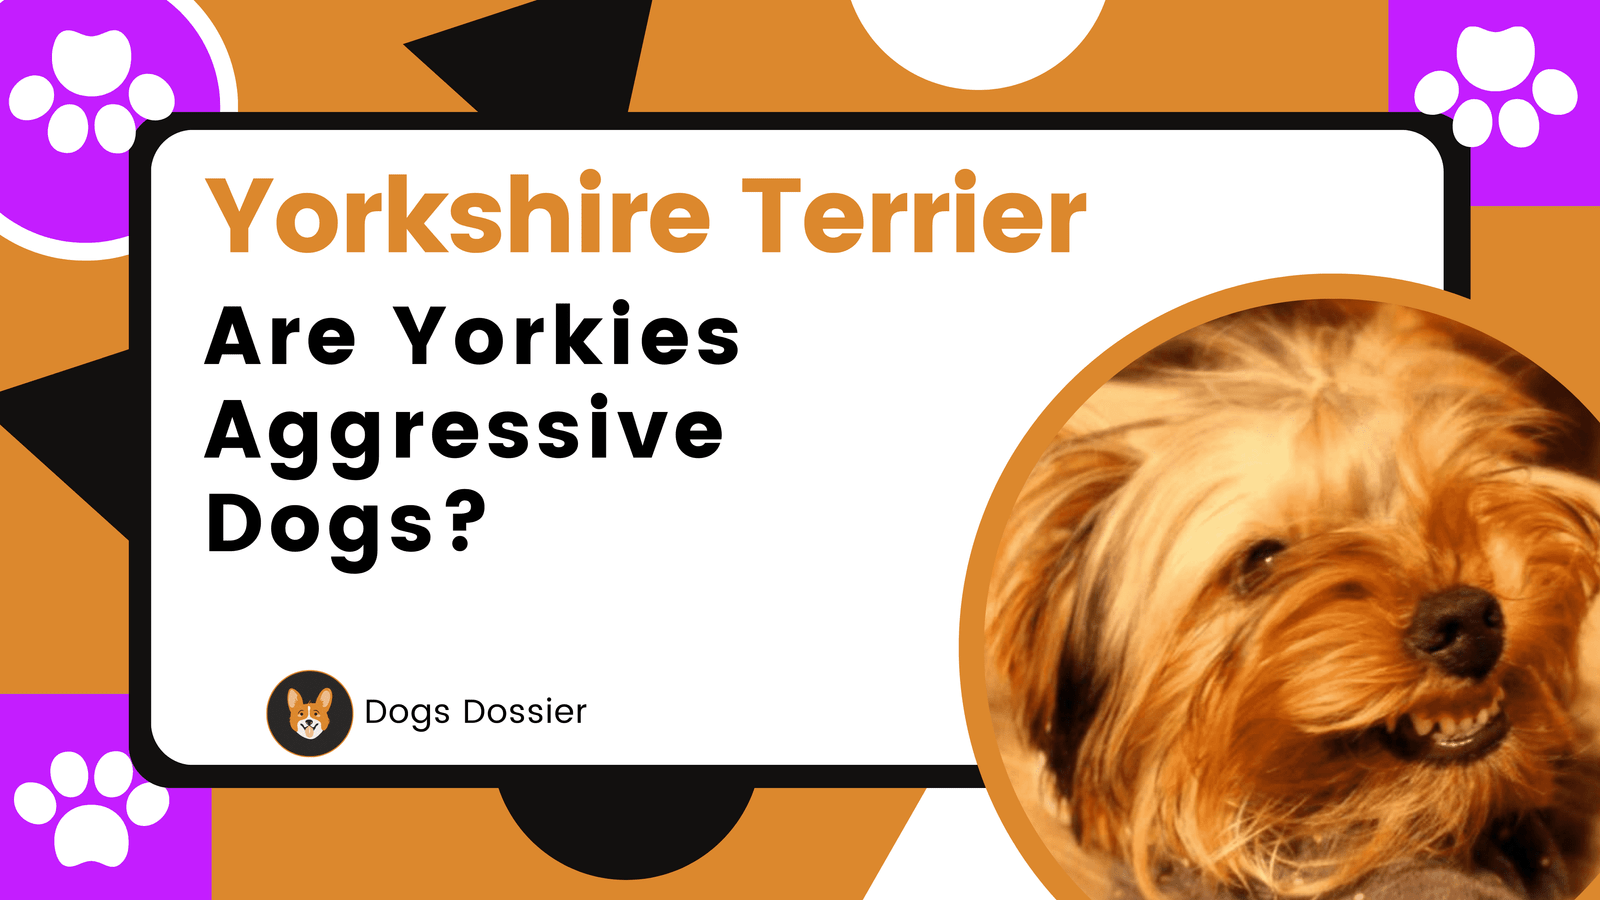 Are Yorkies Aggressive Dogs?